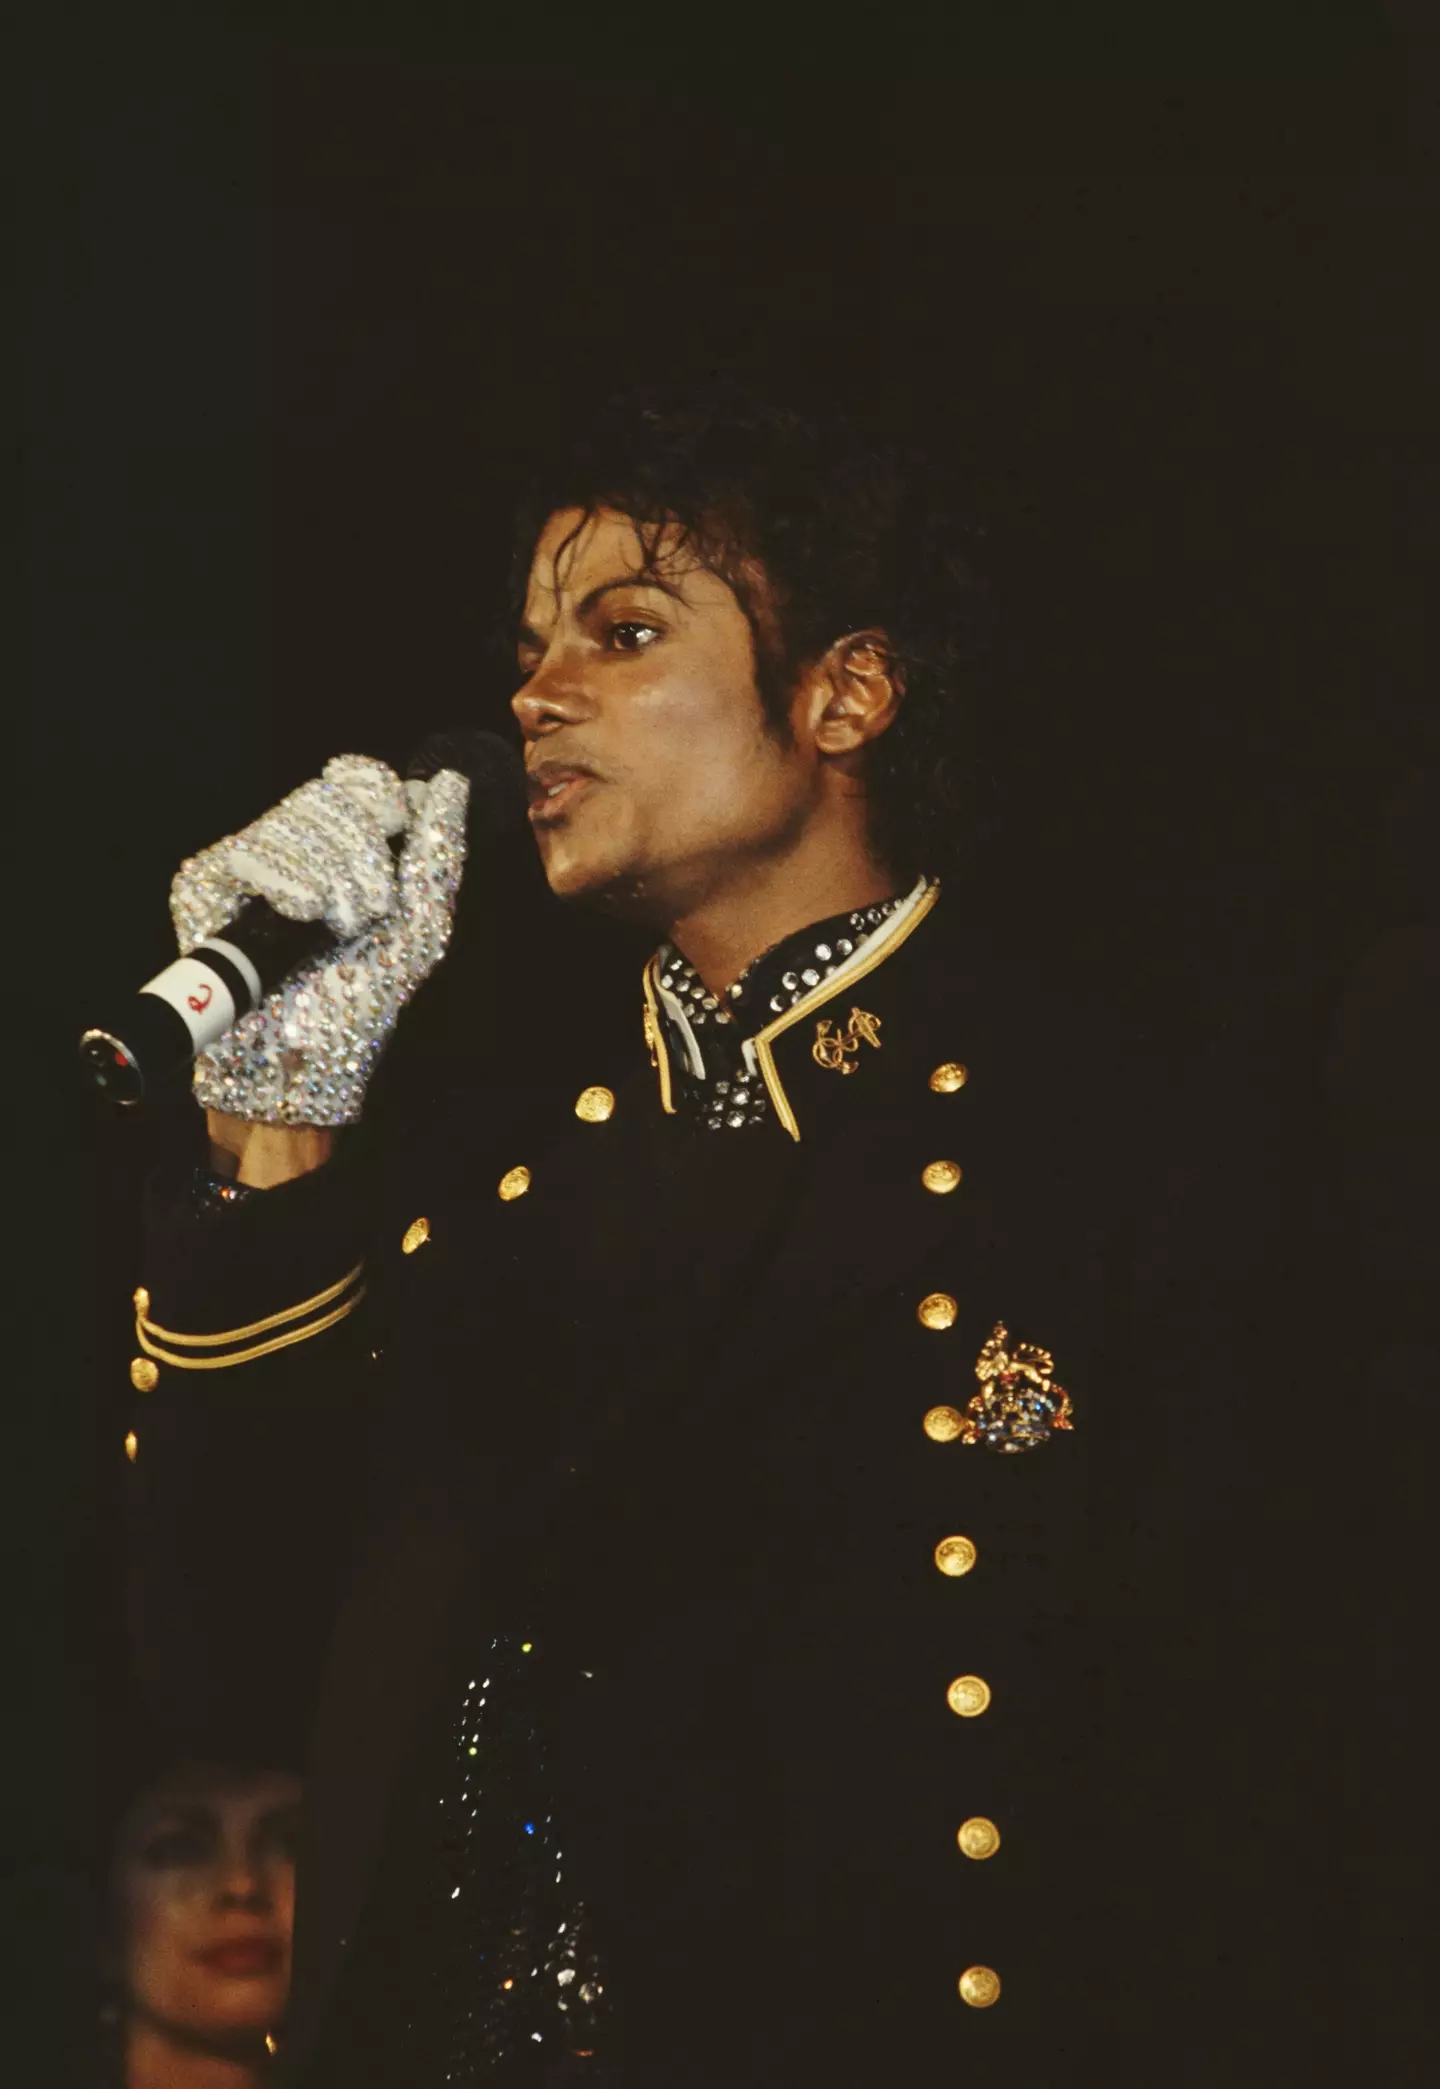 Michael Jackson first wore the single glove back in the 1980s.